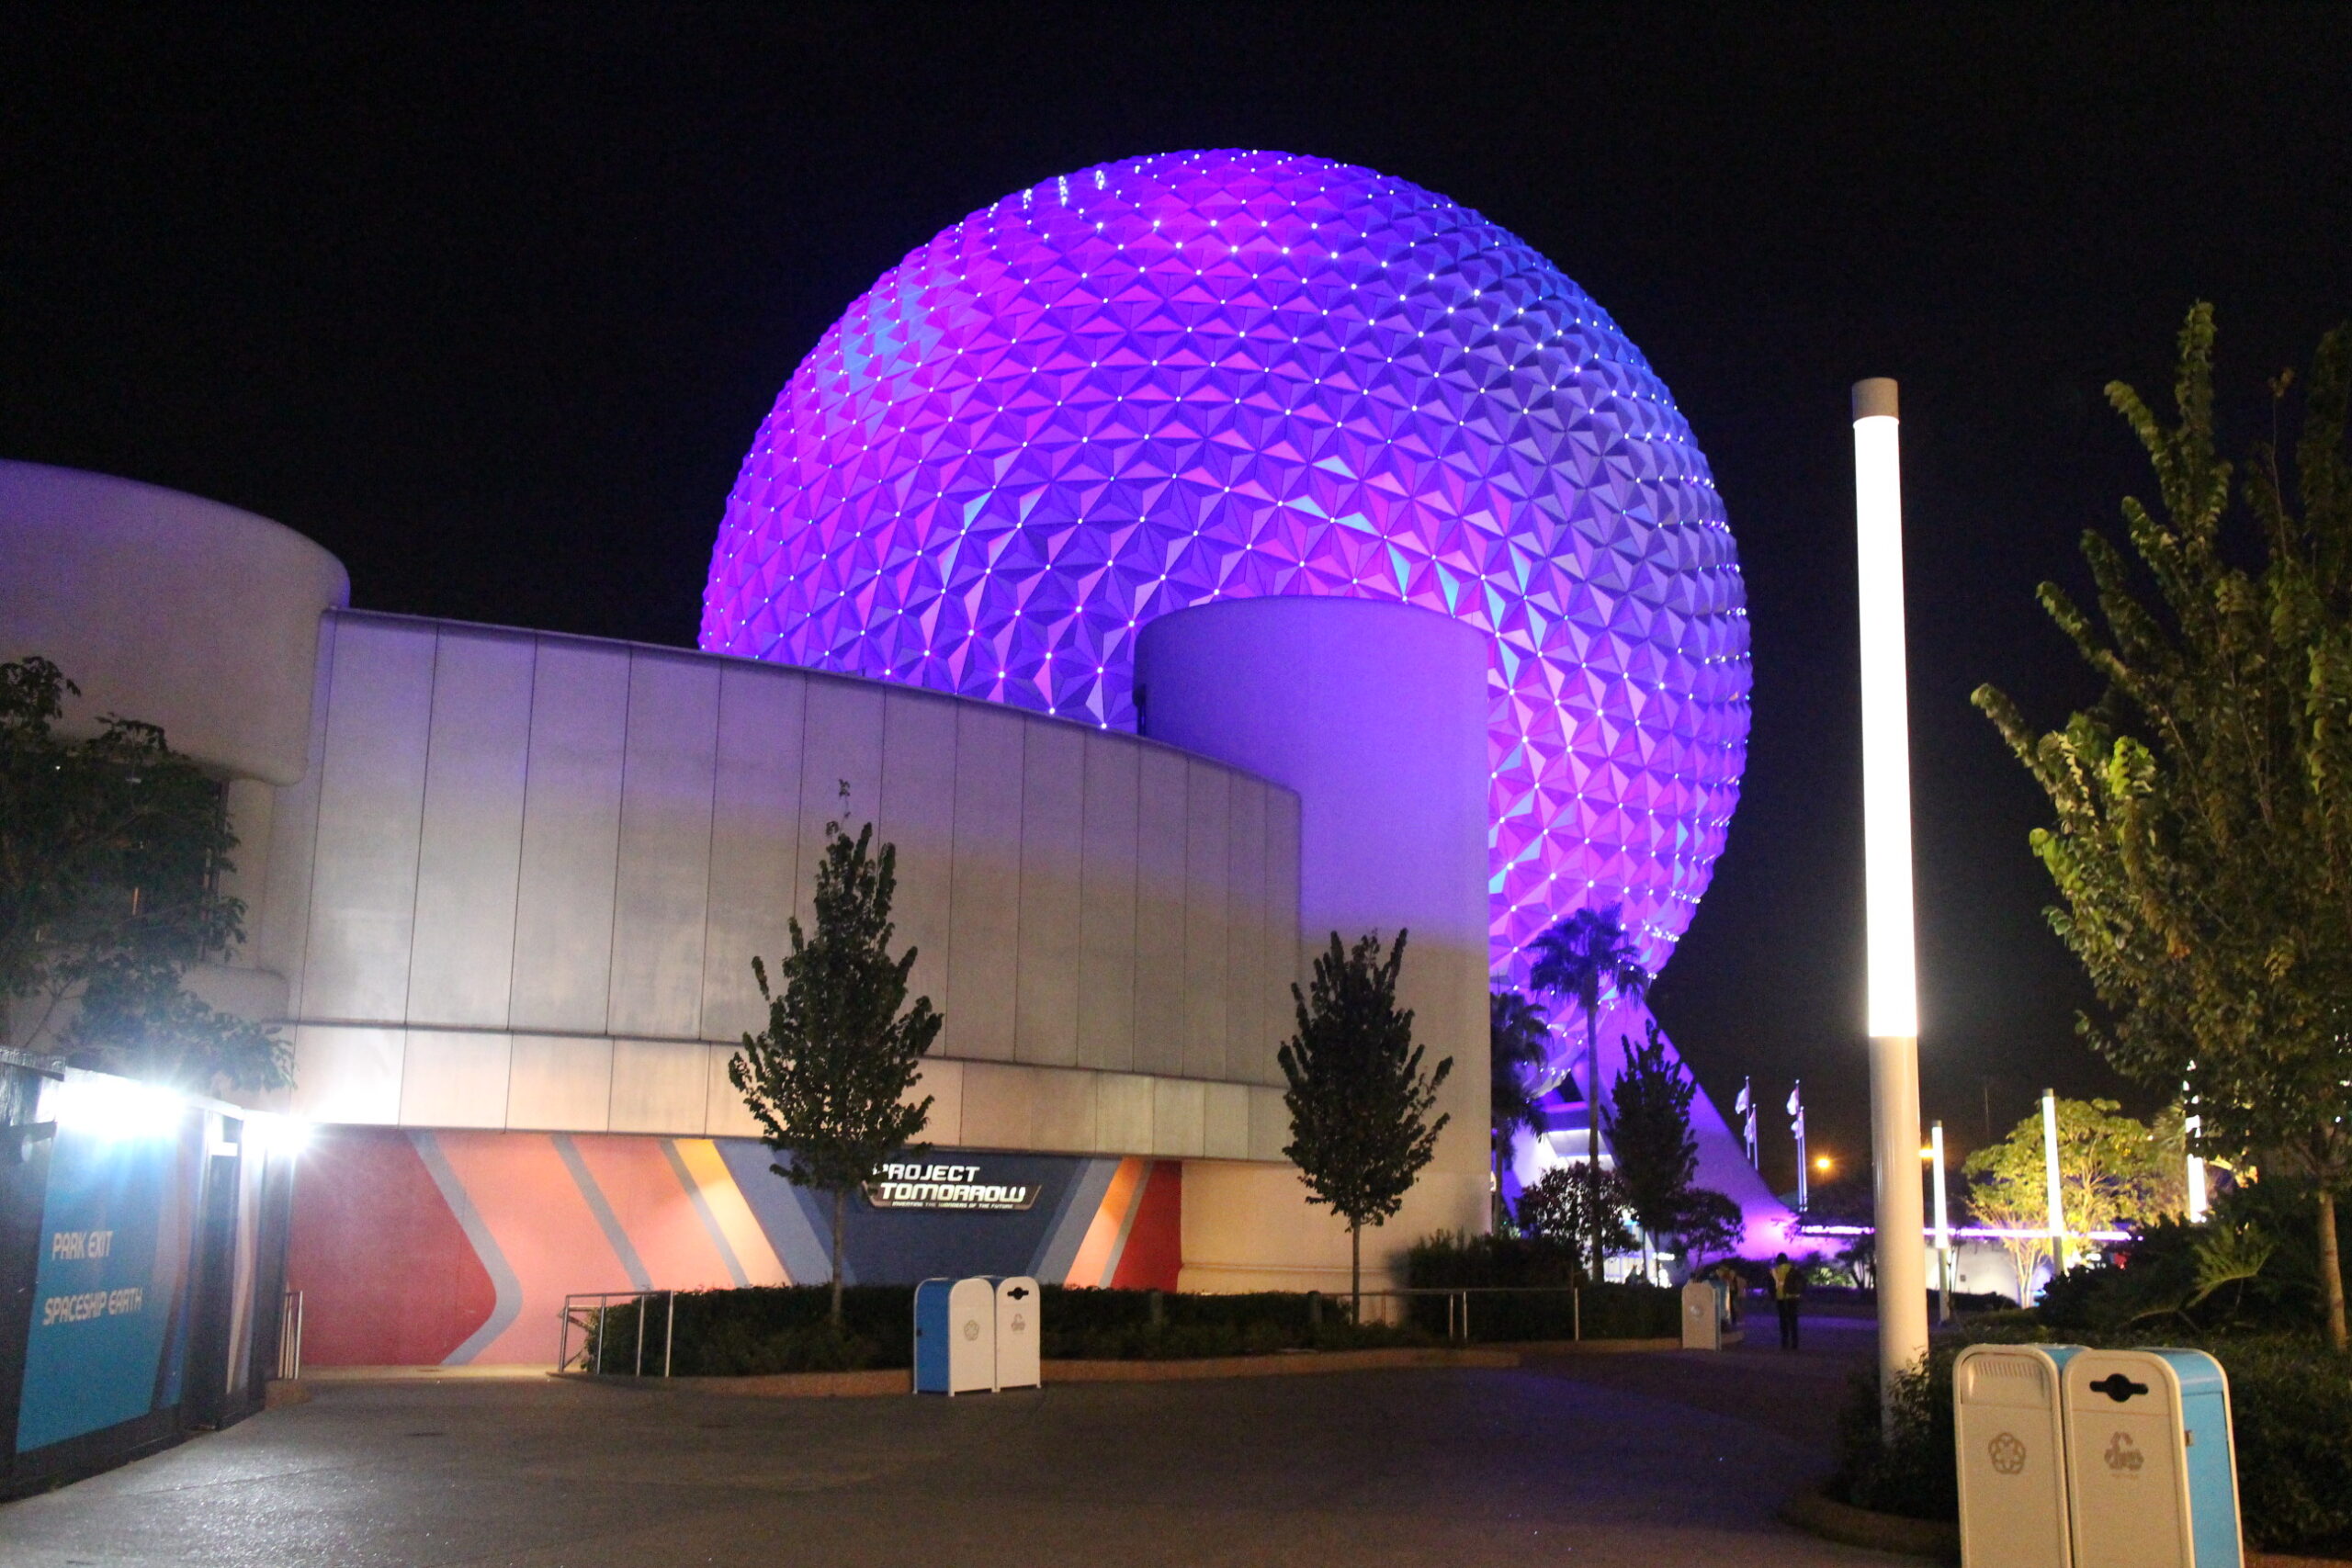 a geodesic sphere known as Spaceship Earth is lit in blue and purple behind the corresponding ride buidling